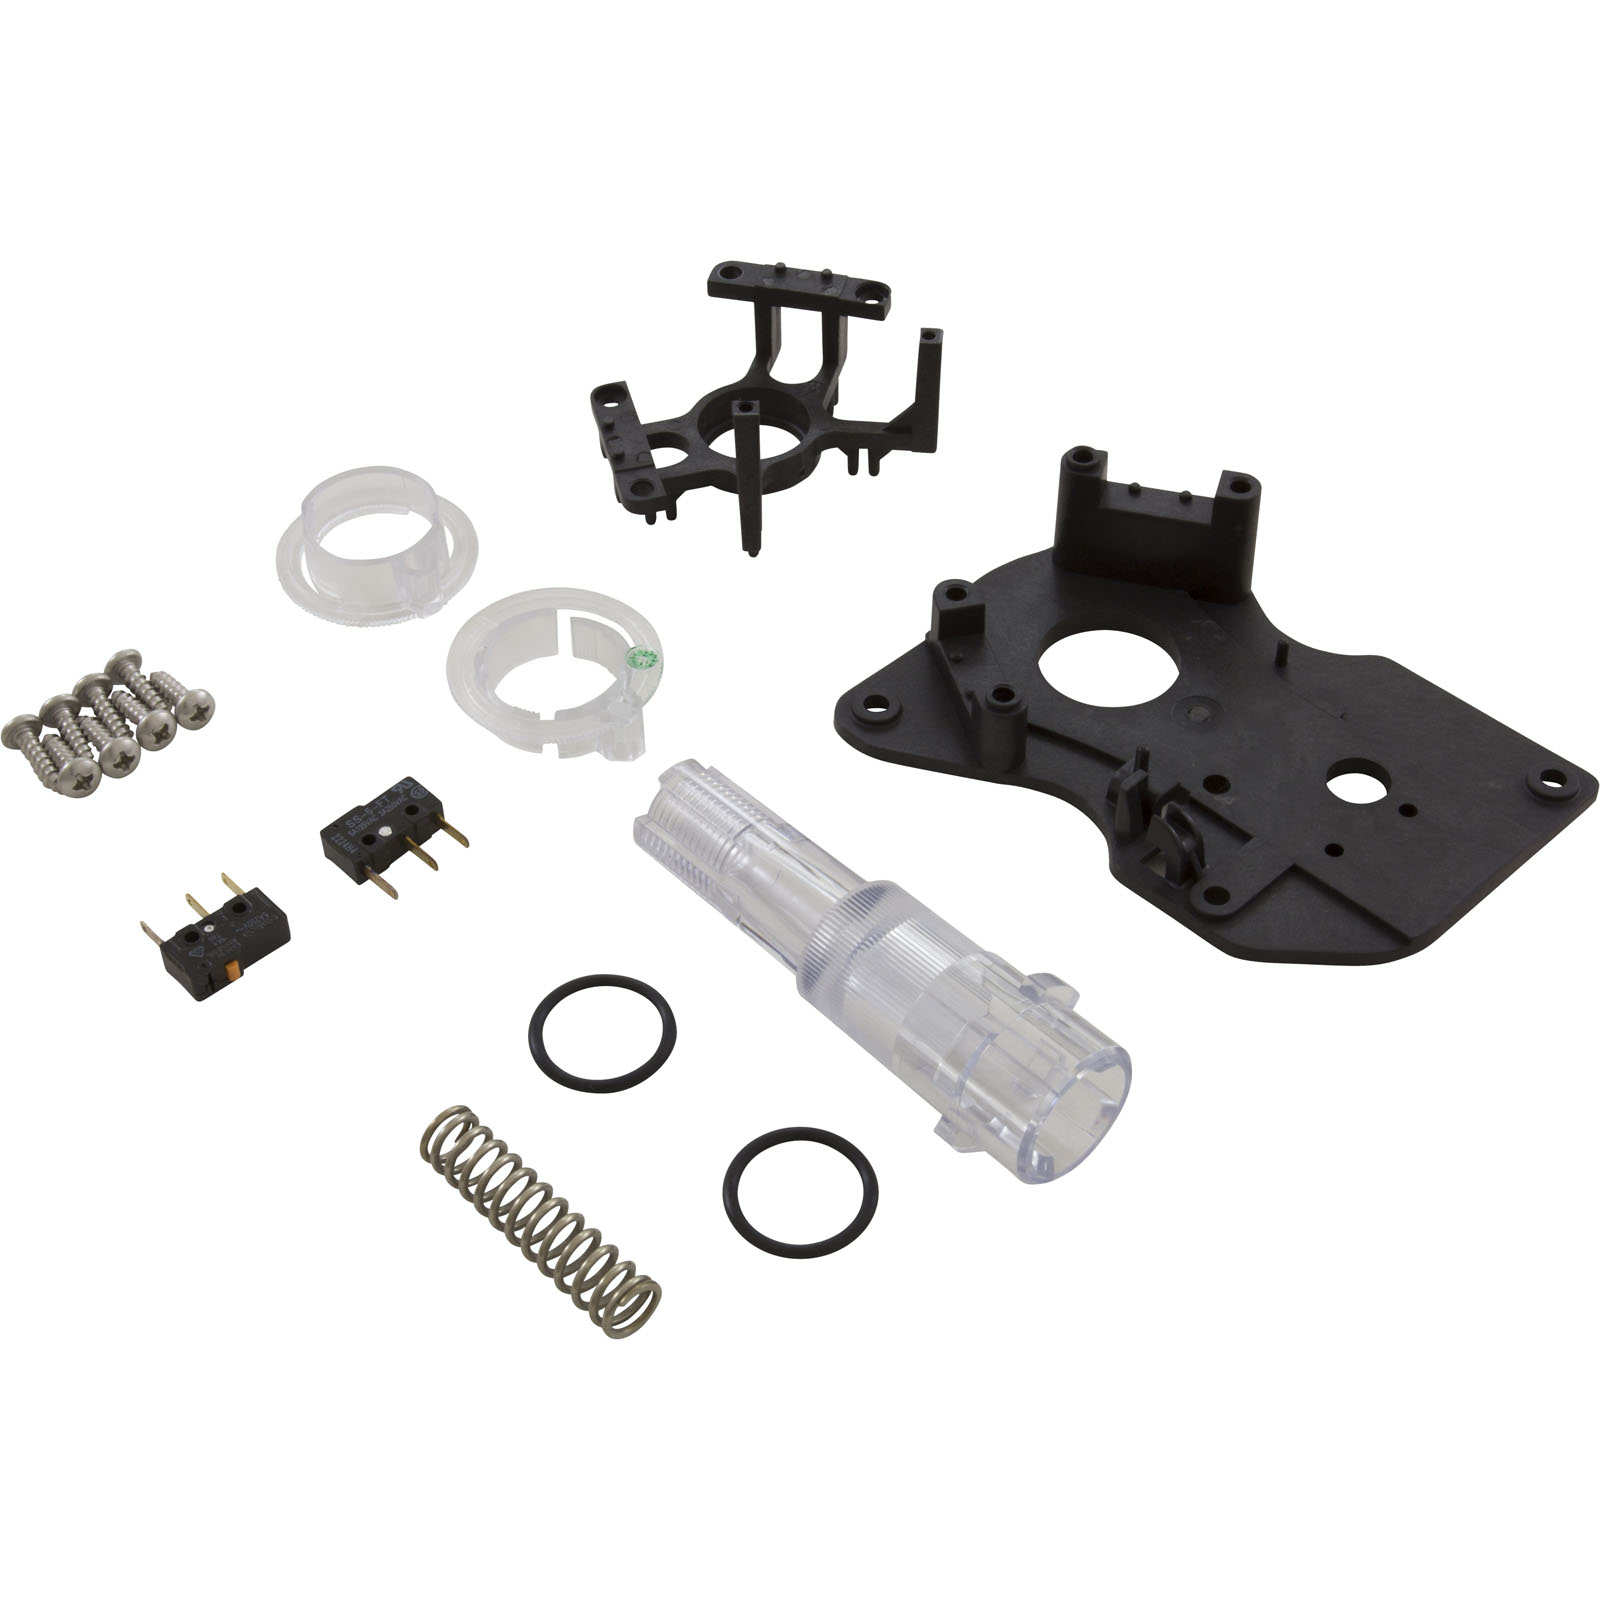 Picture of R0408700 Center Plate Kit Jandy Valve Actuator